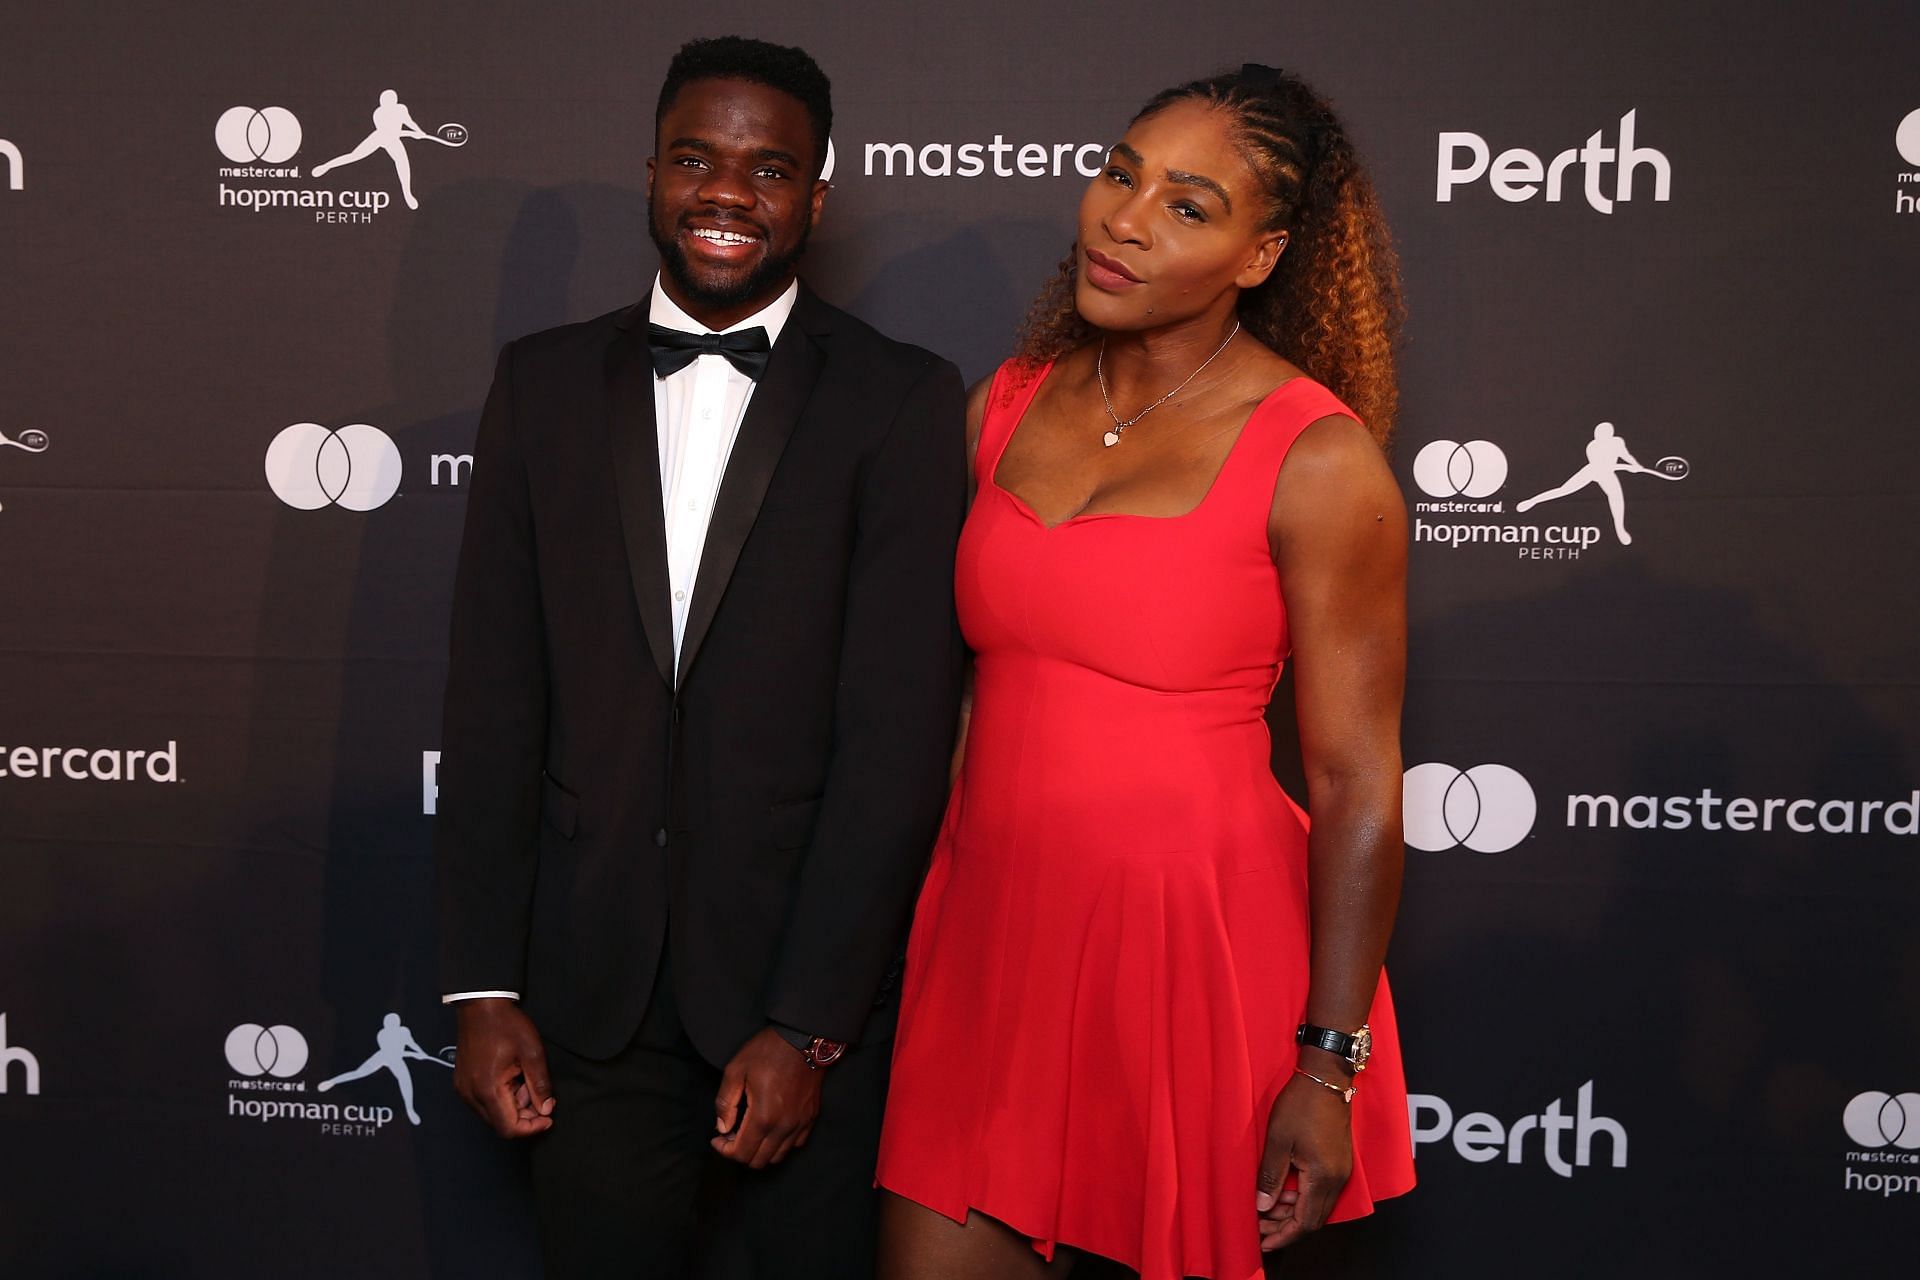 Frances Tiafoe and Serena Williams pictured during the 2019 Hopman Cup.